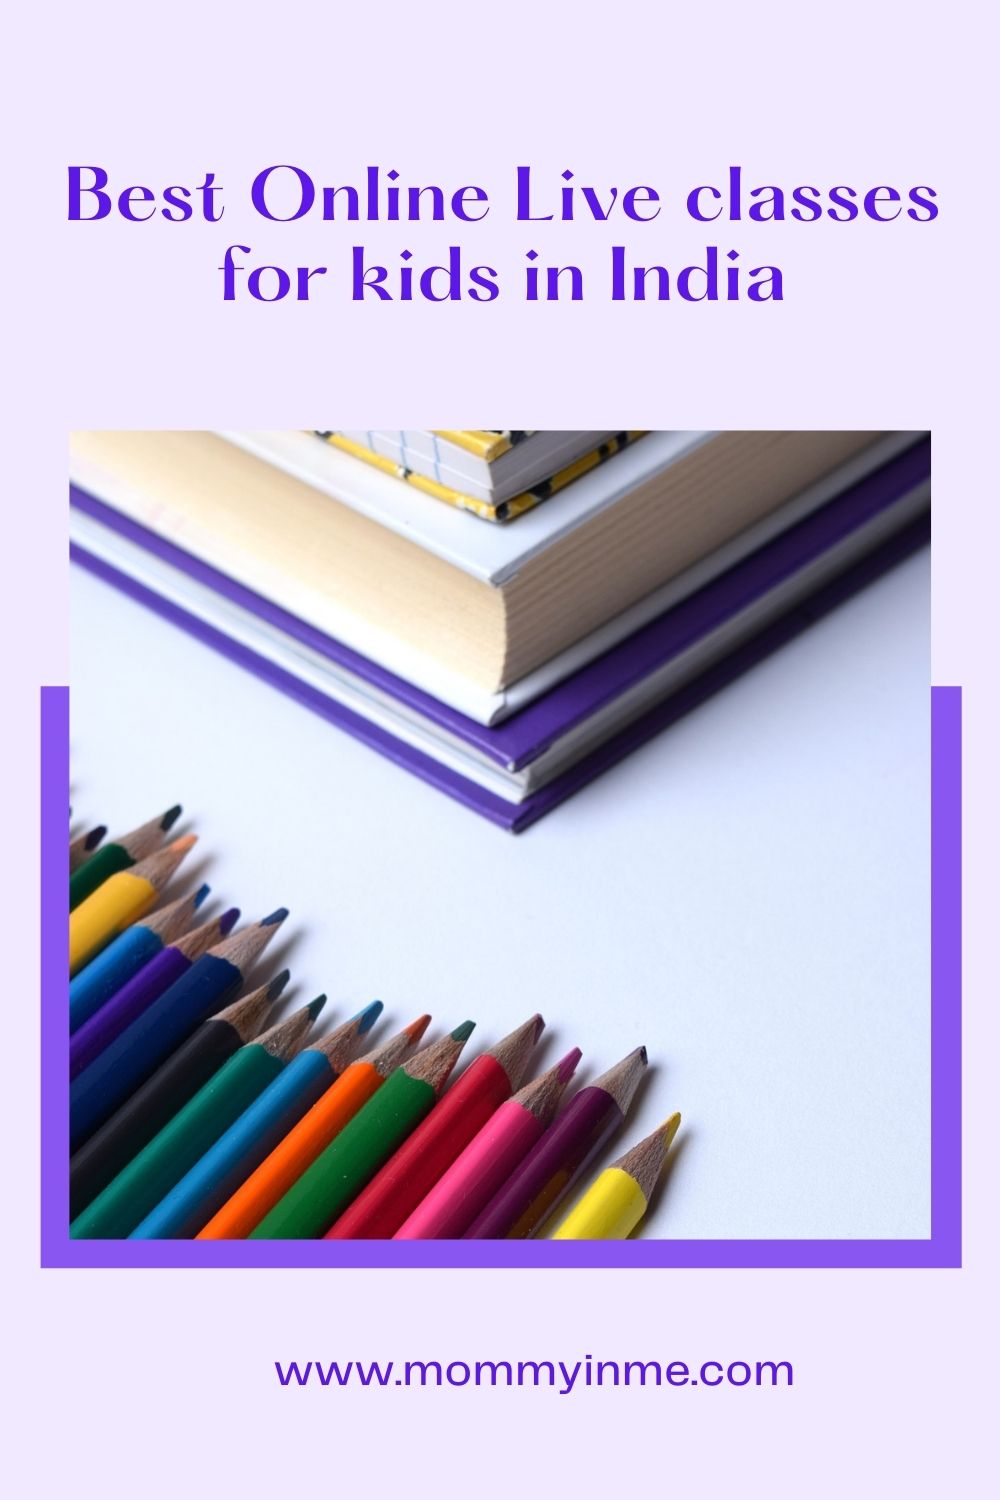 Are you looking for Best Online Live classes for kids in 2021 in India? Always on Learning Online classes provide a variety of Online classes #OnlineEnglishclassesforkids #Onlineliveclasses #BestOnlineLiveclassesforKids #OnlineEnglishlearning #Onlinedanceclasses #OnlineMathclasses